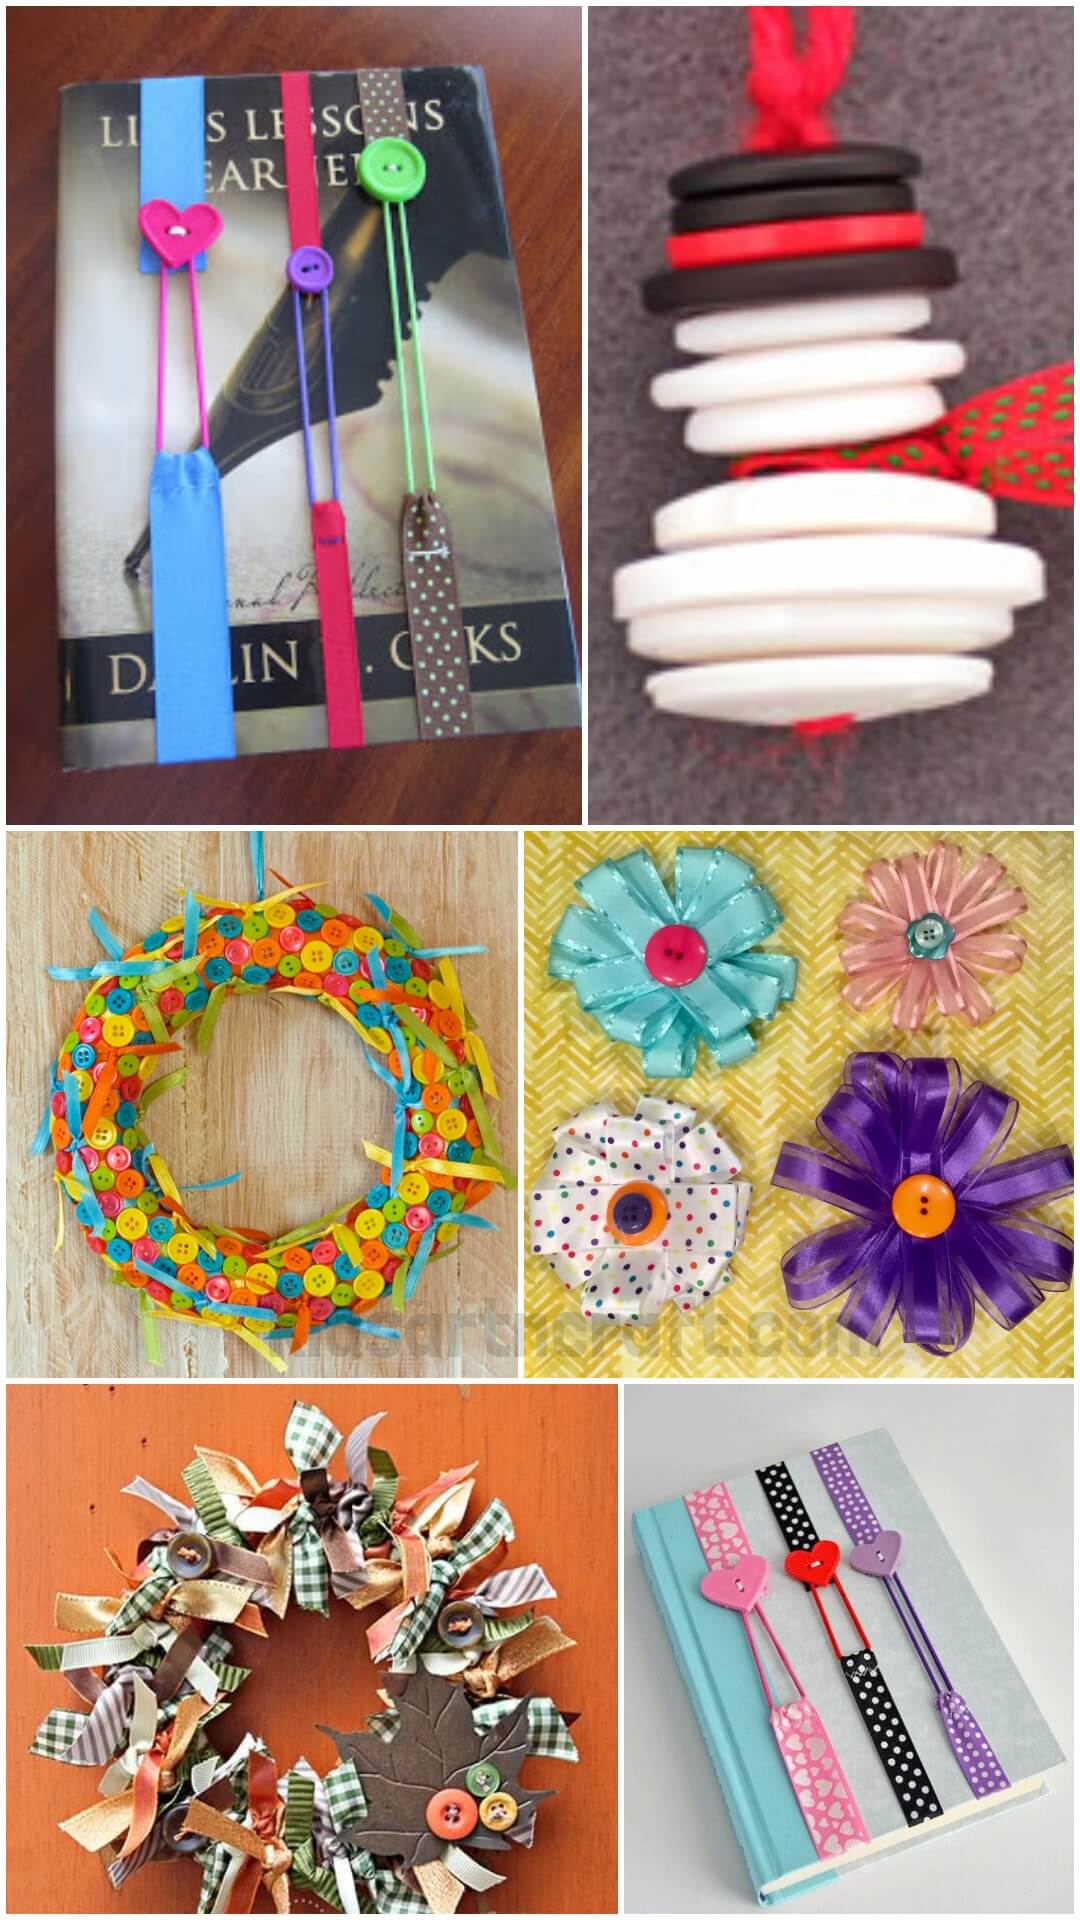 Easy Crafts With Buttons & Ribbons